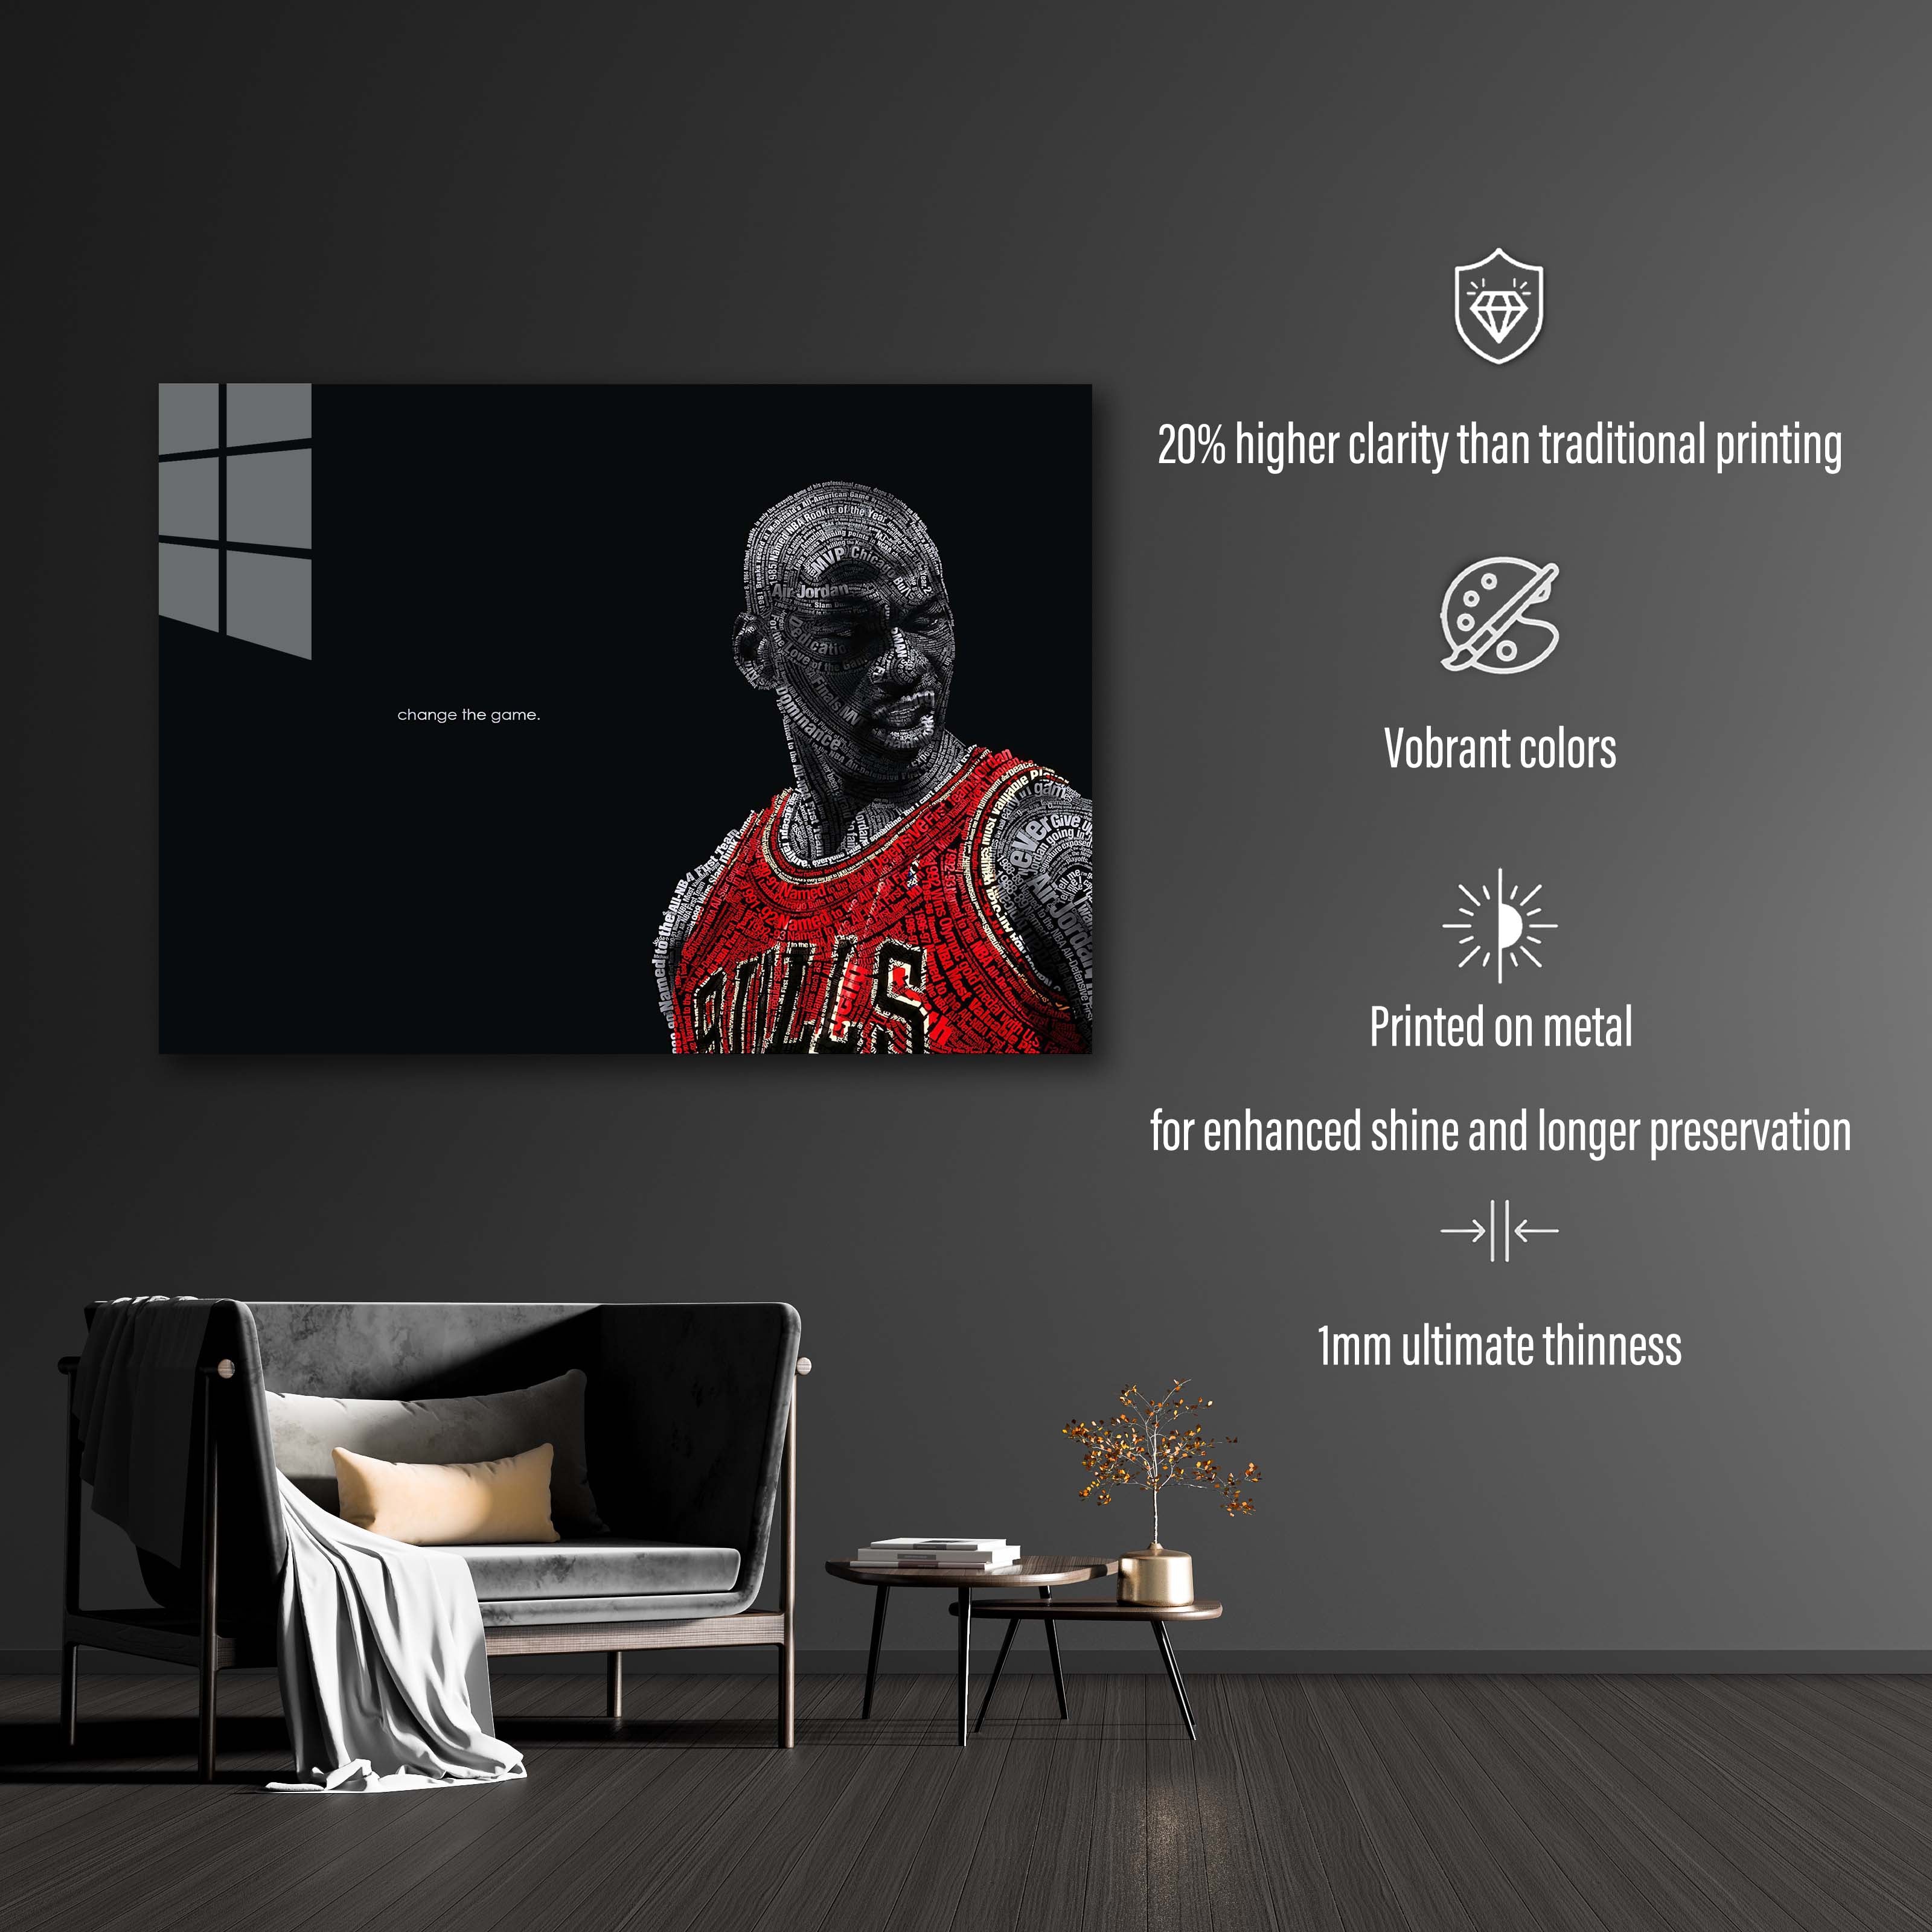 Change the Game Michael Jordan-designed by @DynCreative